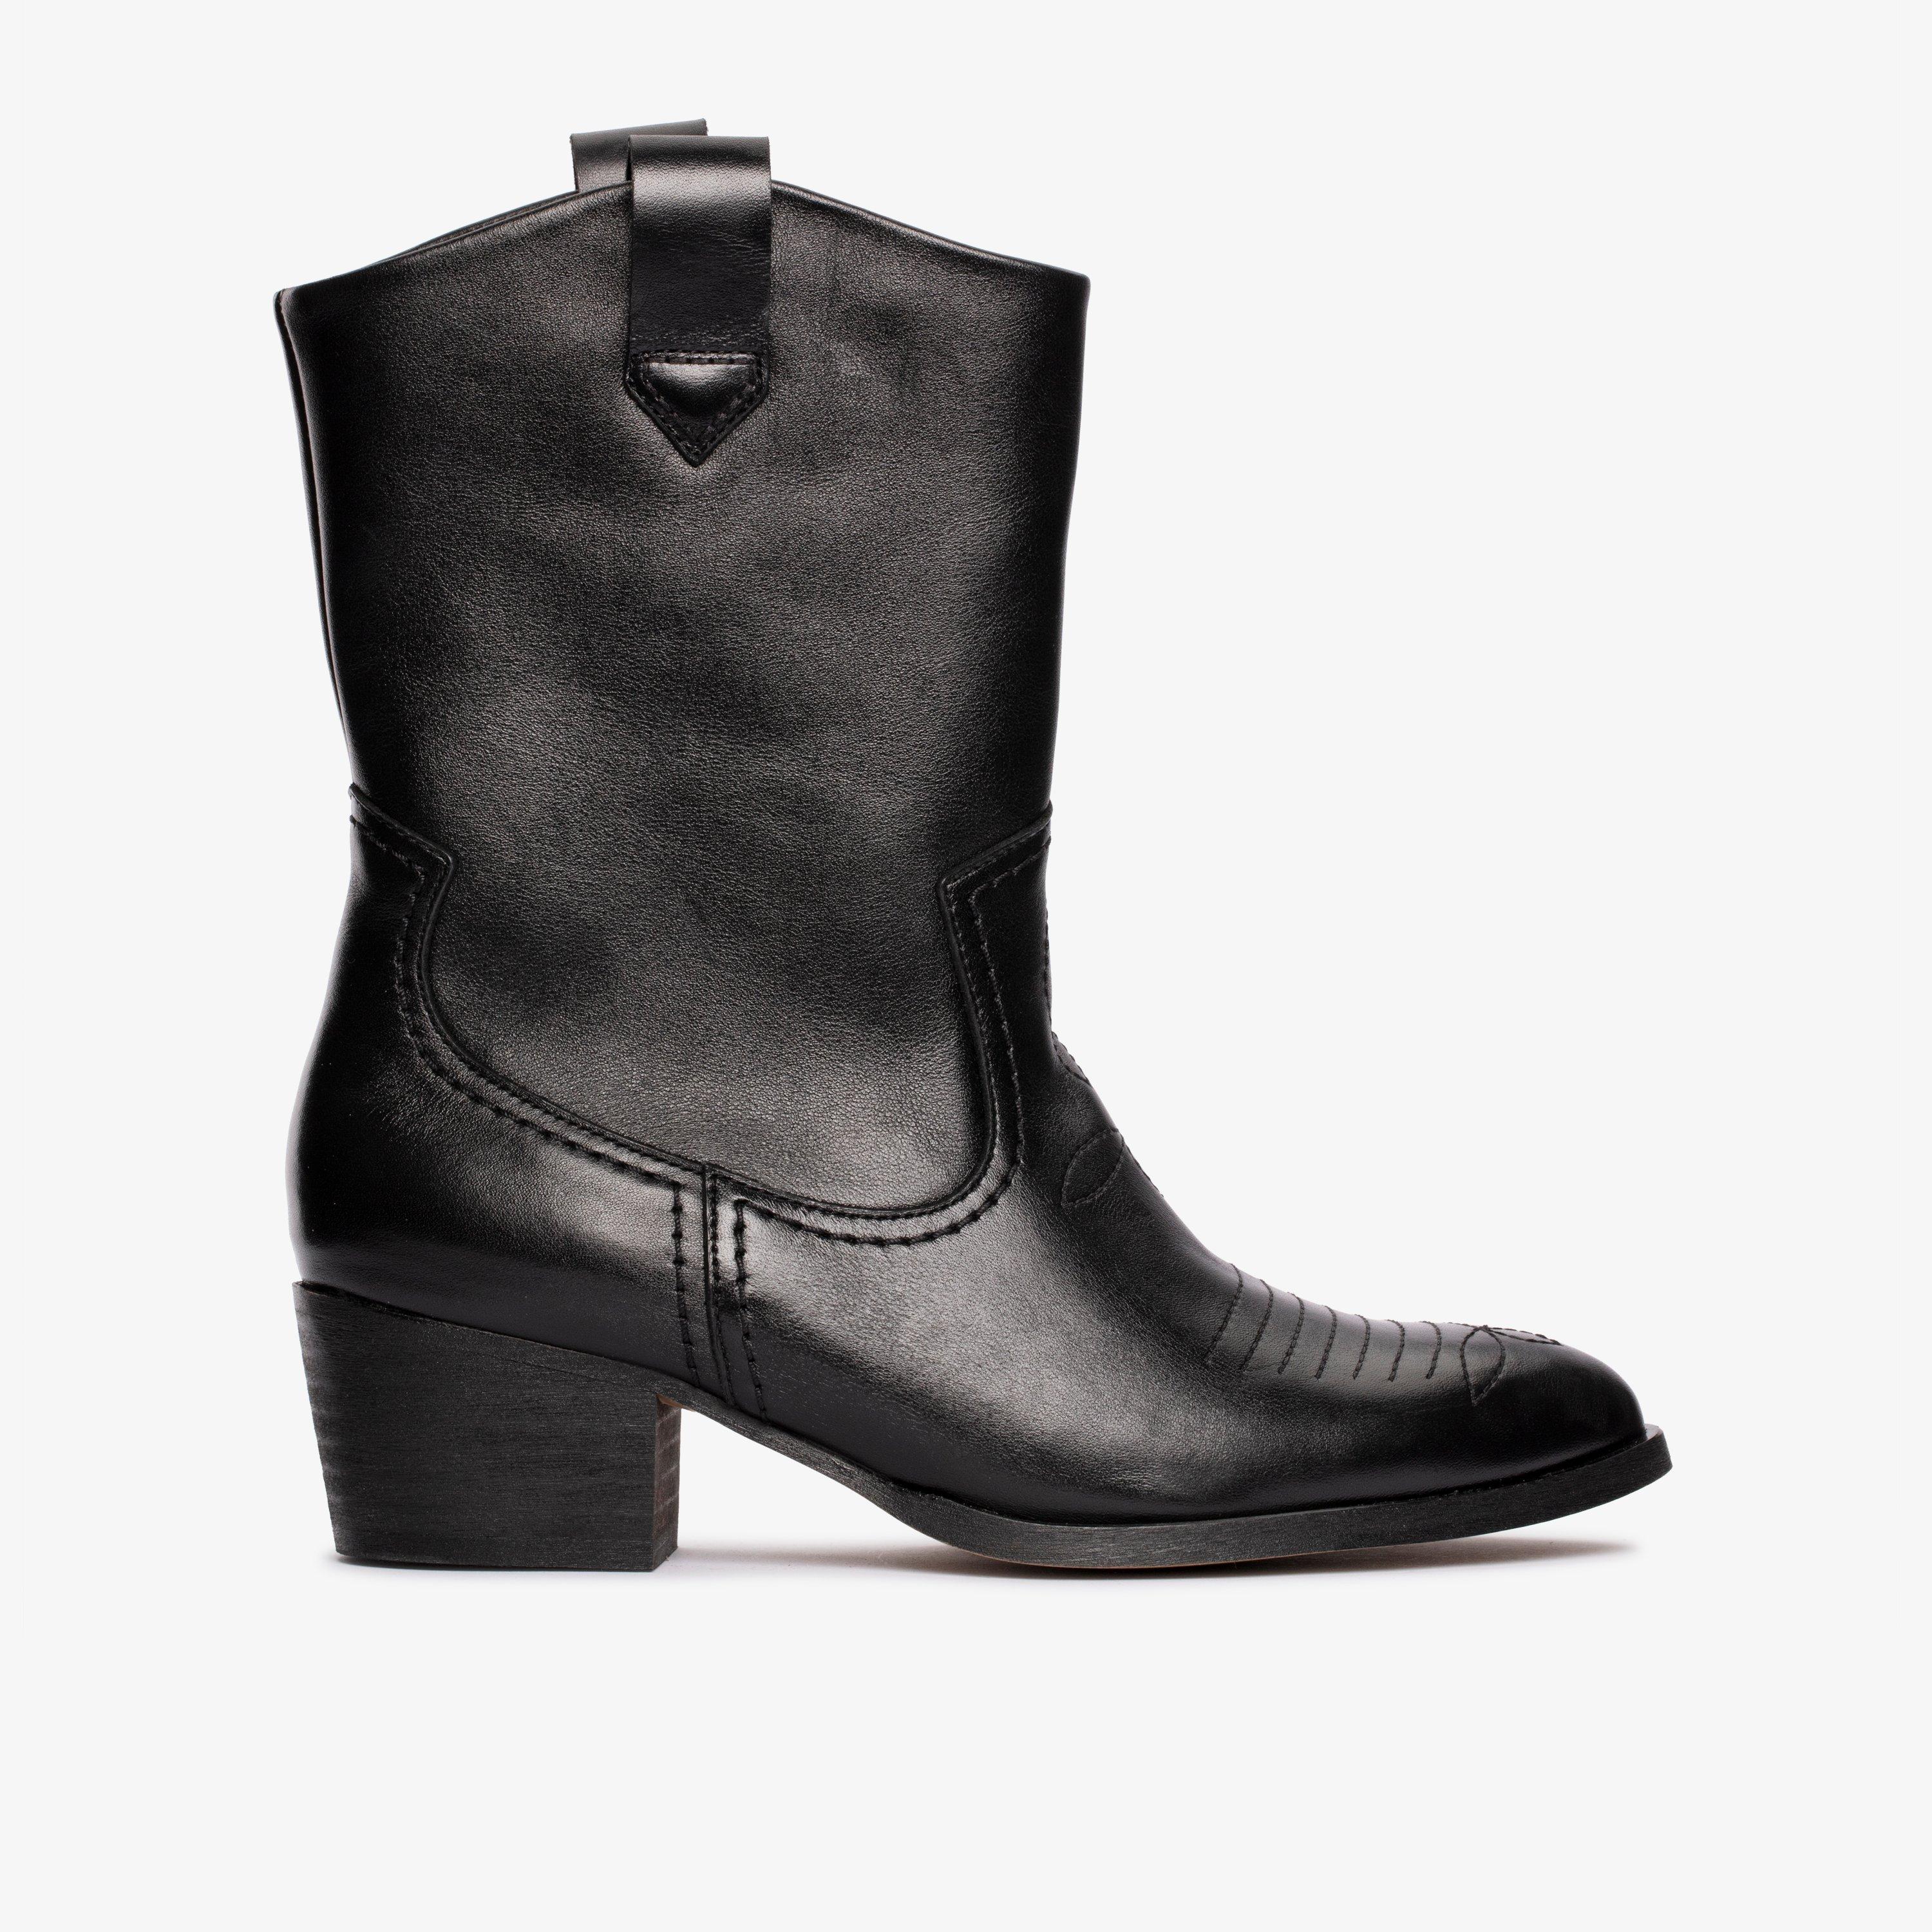 WOMENS Octavia Up Black Leather Mid Calf Boots | Clarks US